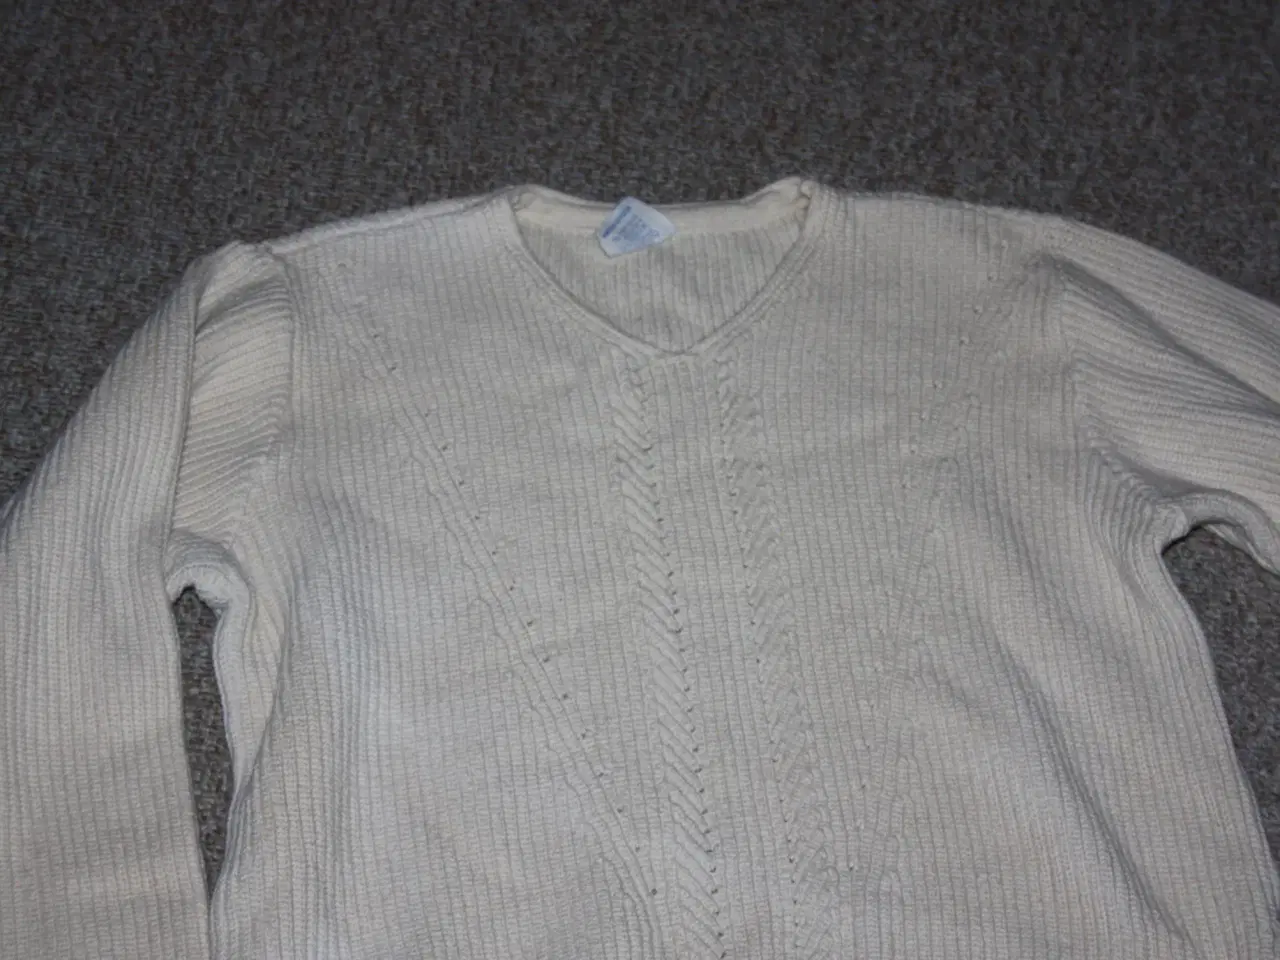 Billede 2 - Sweater Olympic str. M 100% cotton made in Greece 